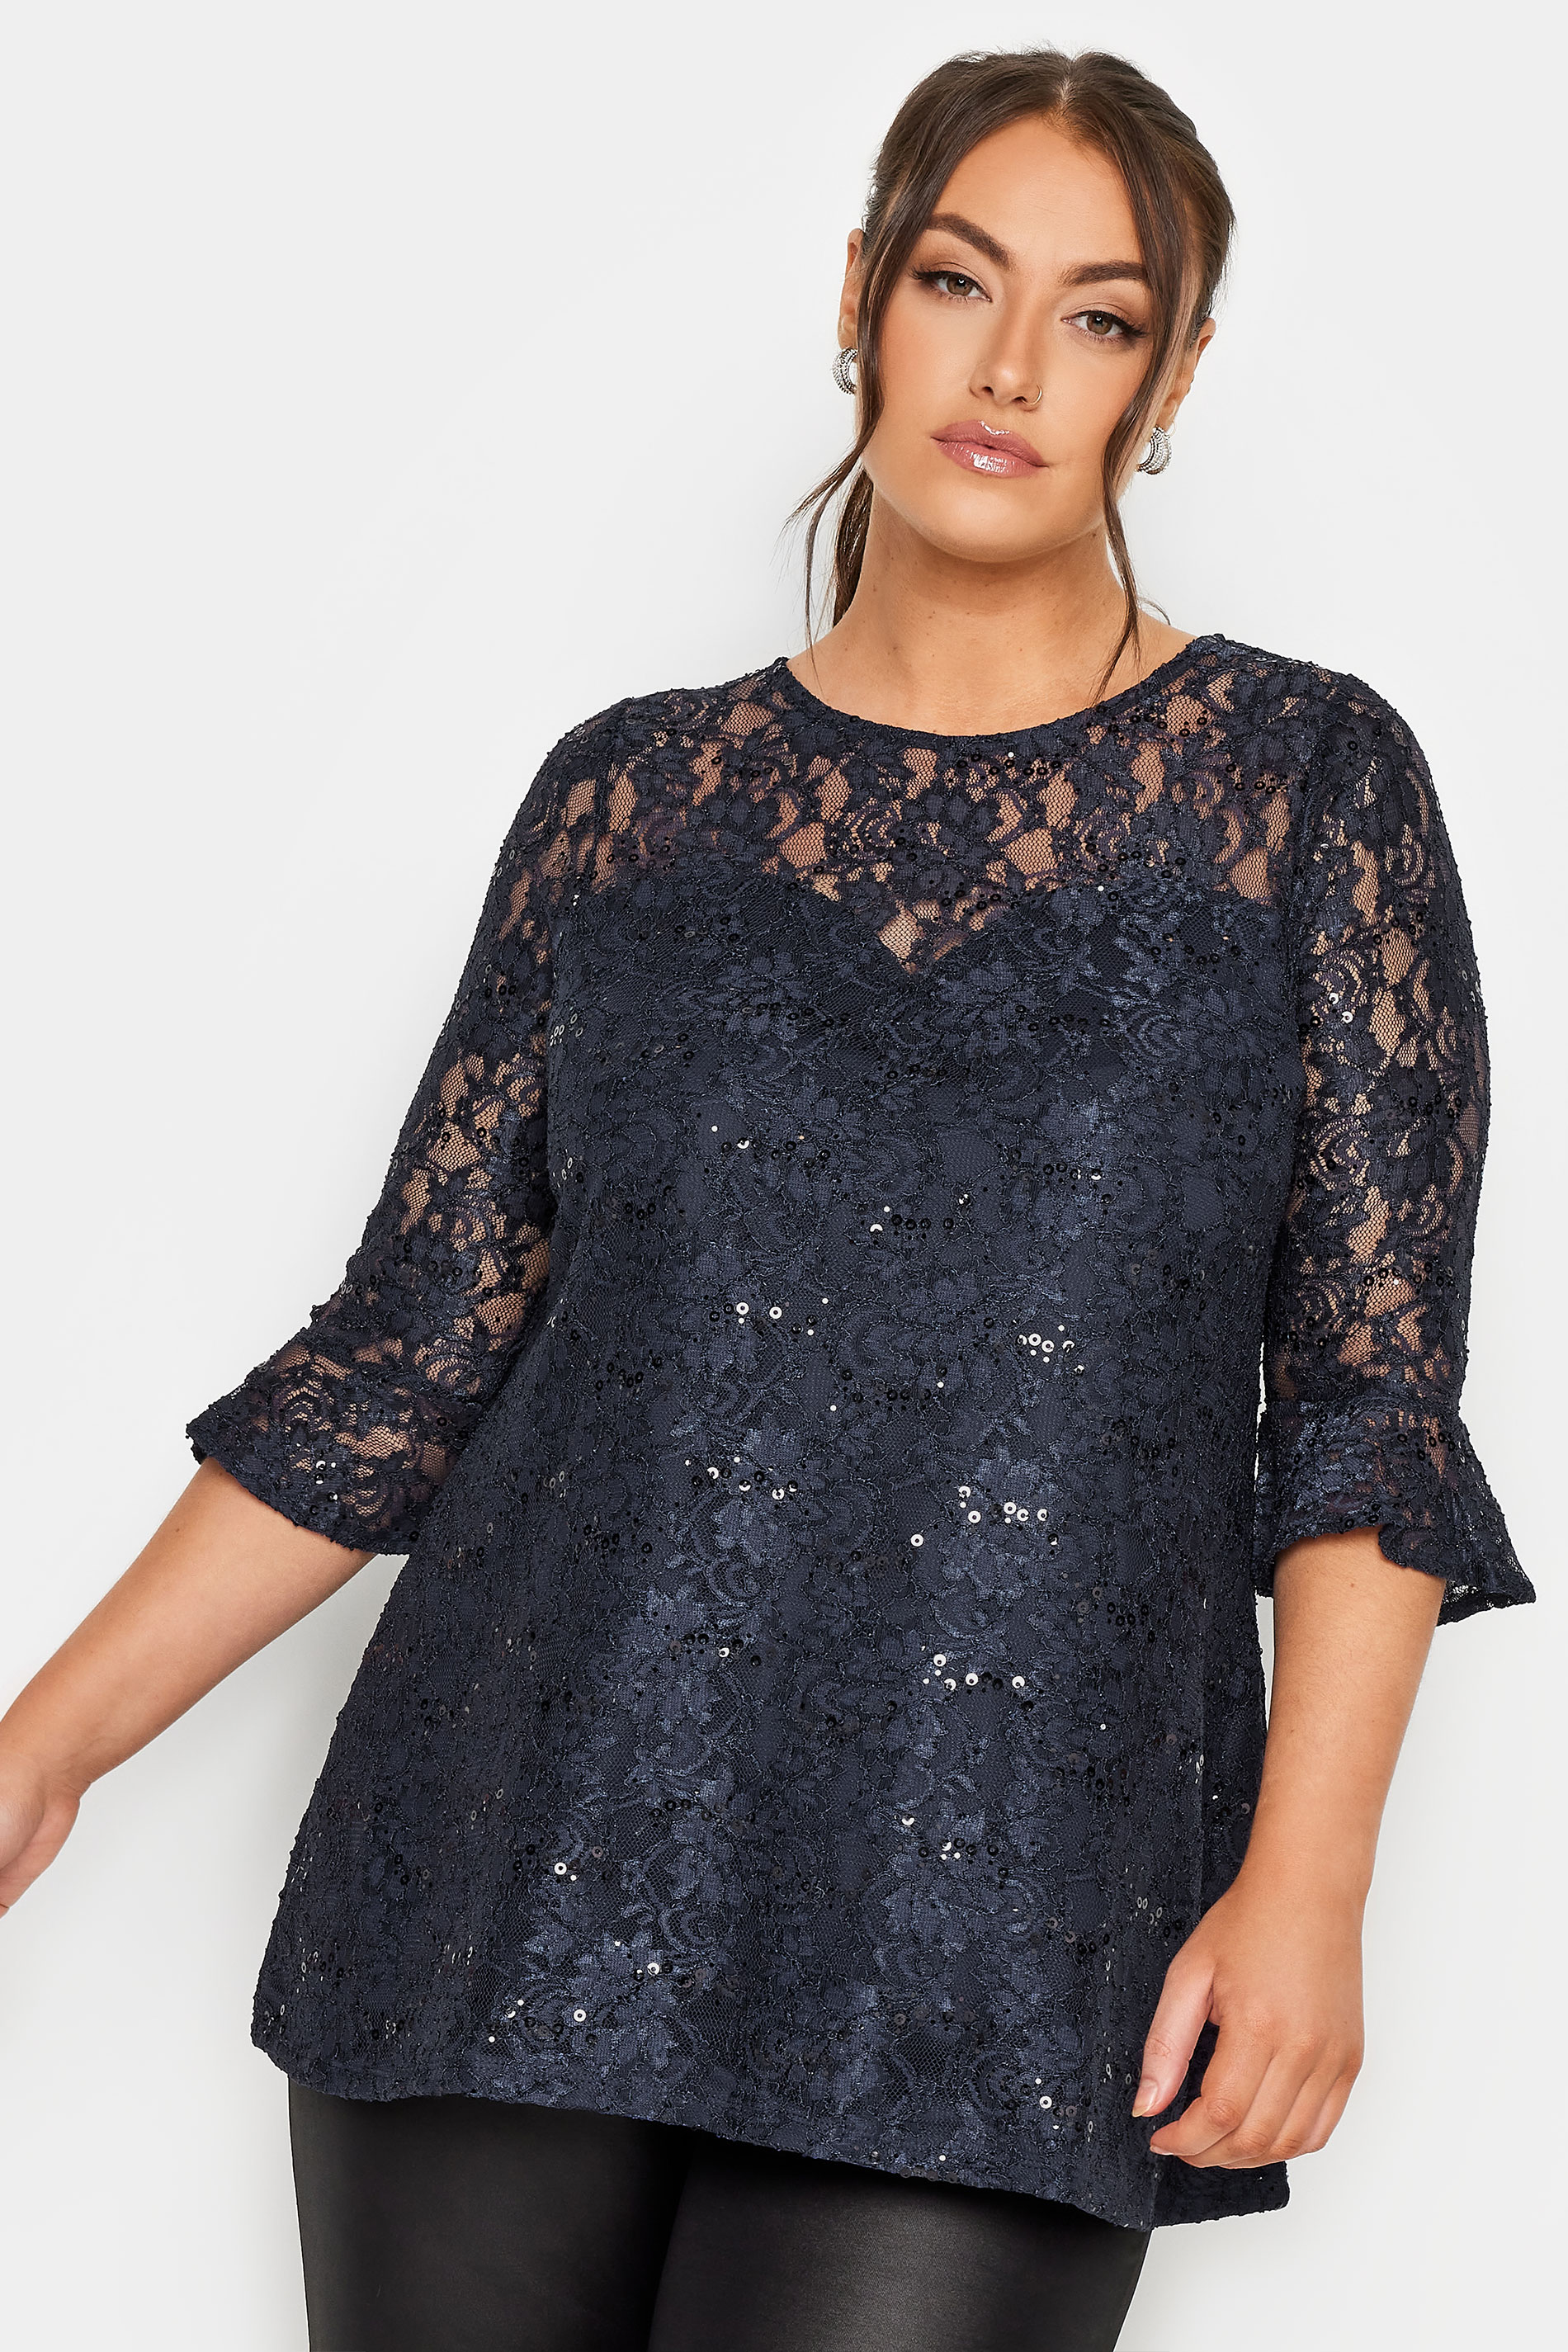 Product Video For YOURS Plus Size Dark Blue Lace Sequin Embellished Swing Top | Yours Clothing 1